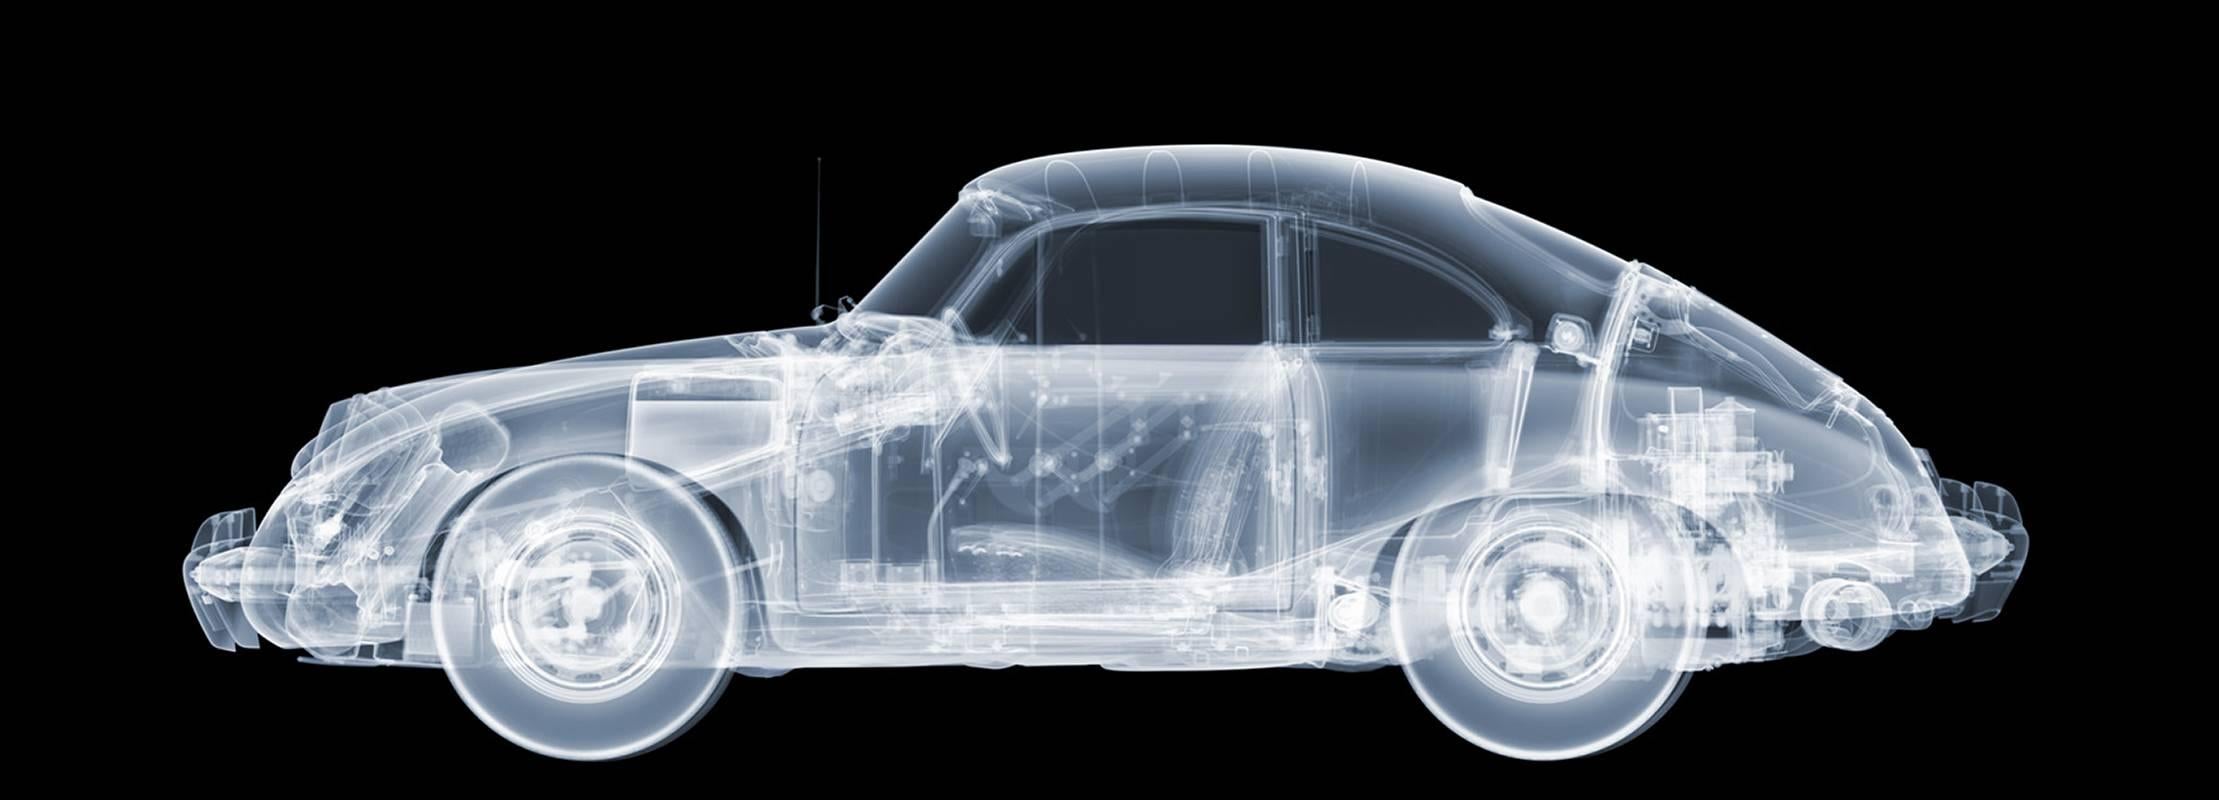 1959 Porsche 365B Coupe - Mixed Media Art by Nick Veasey